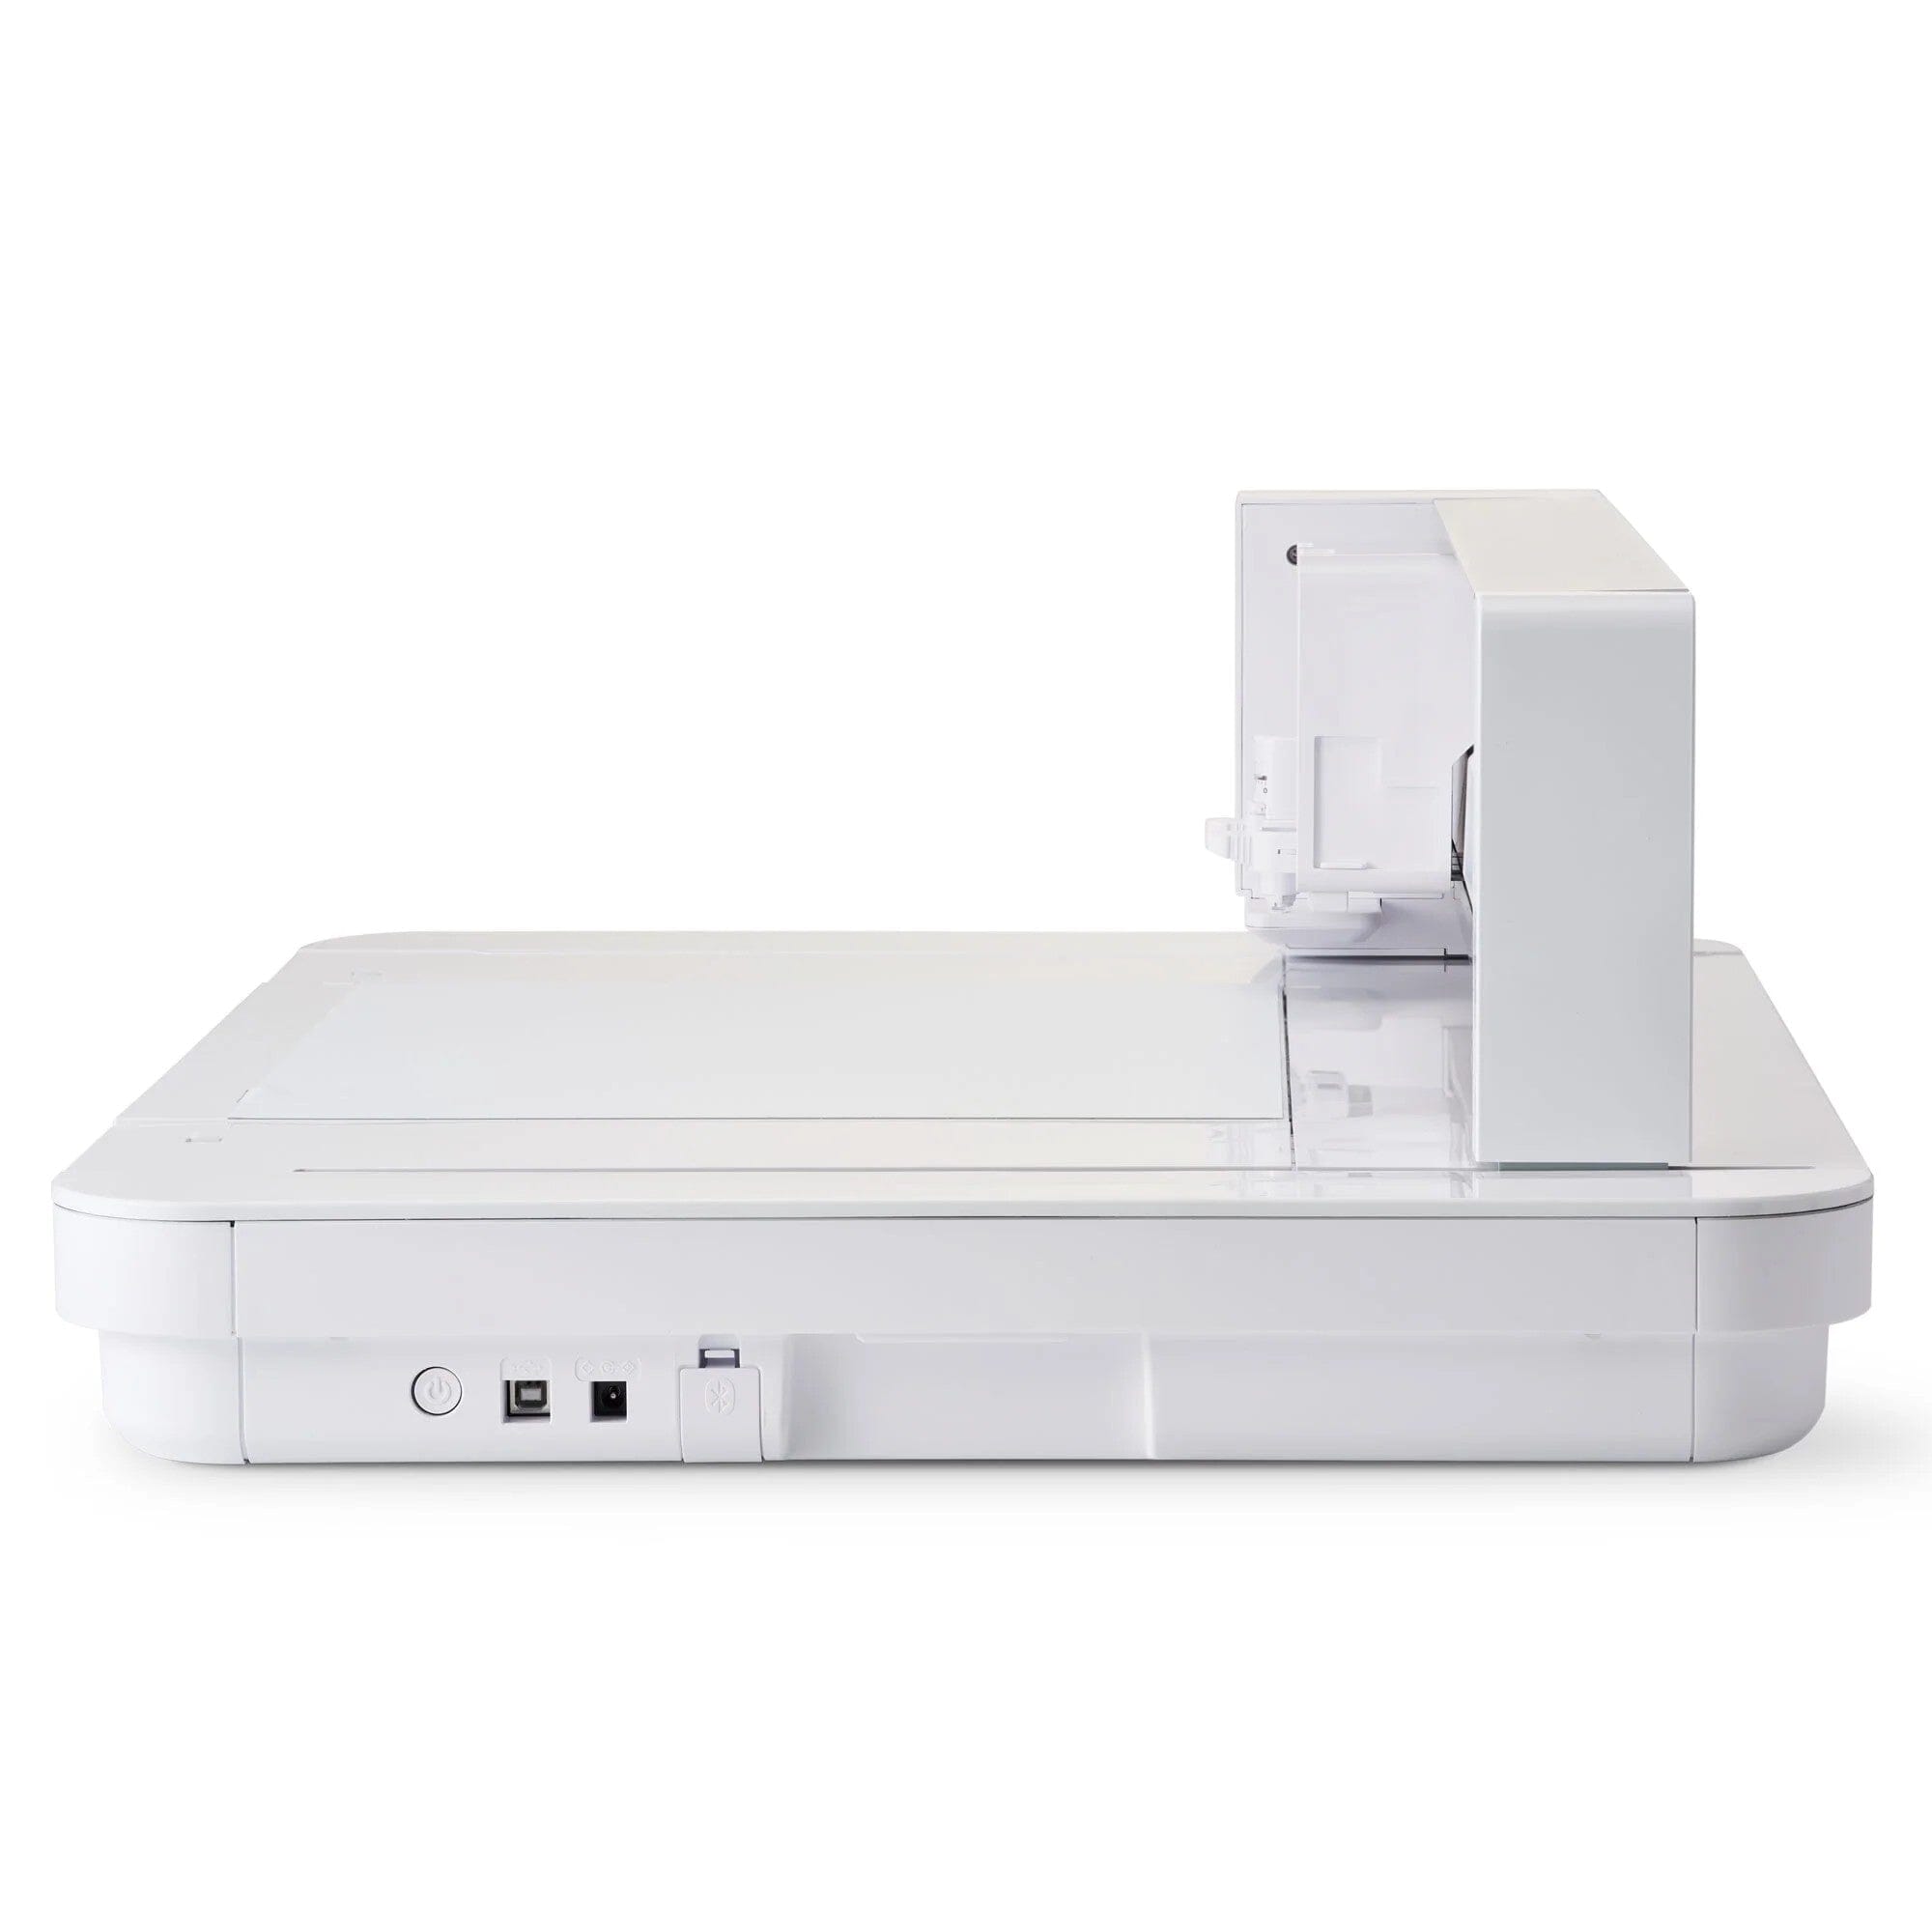 🤯 3 NEW Machines Silhouette Cameo 5, Silhouette Curio 2 and